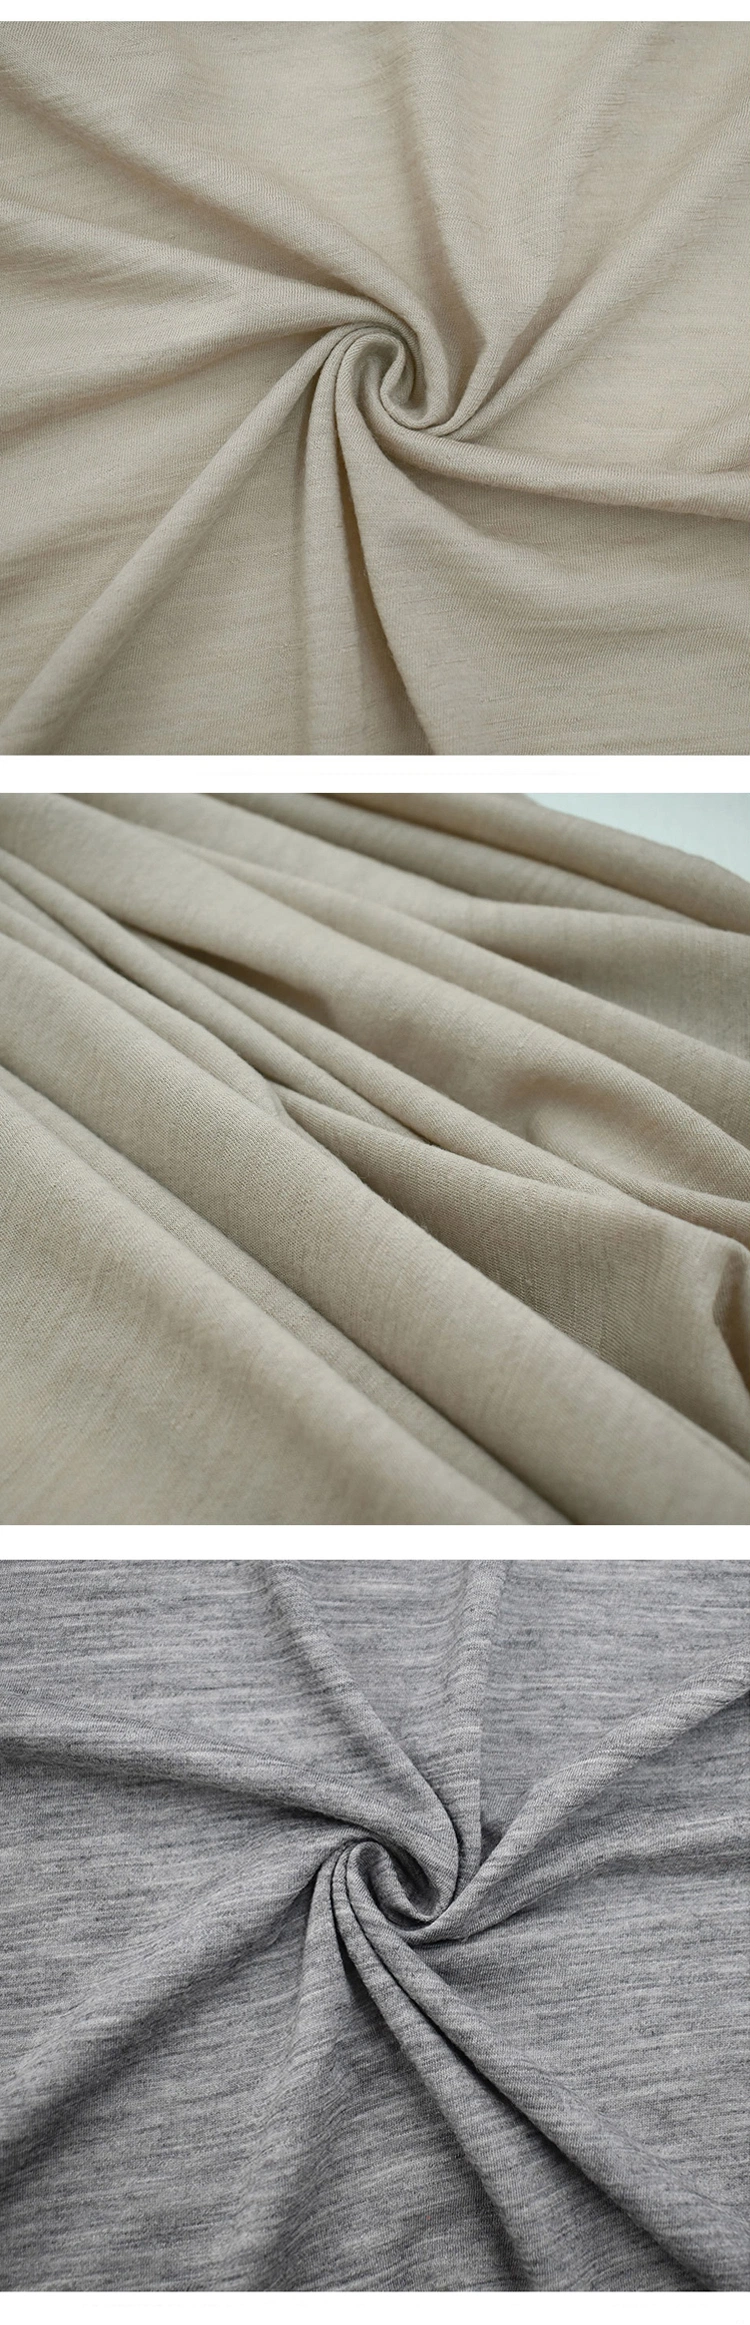 Knitted Jersey Merino Wool High Quality Natural White Single 100% Jersey Fabric for Cloth